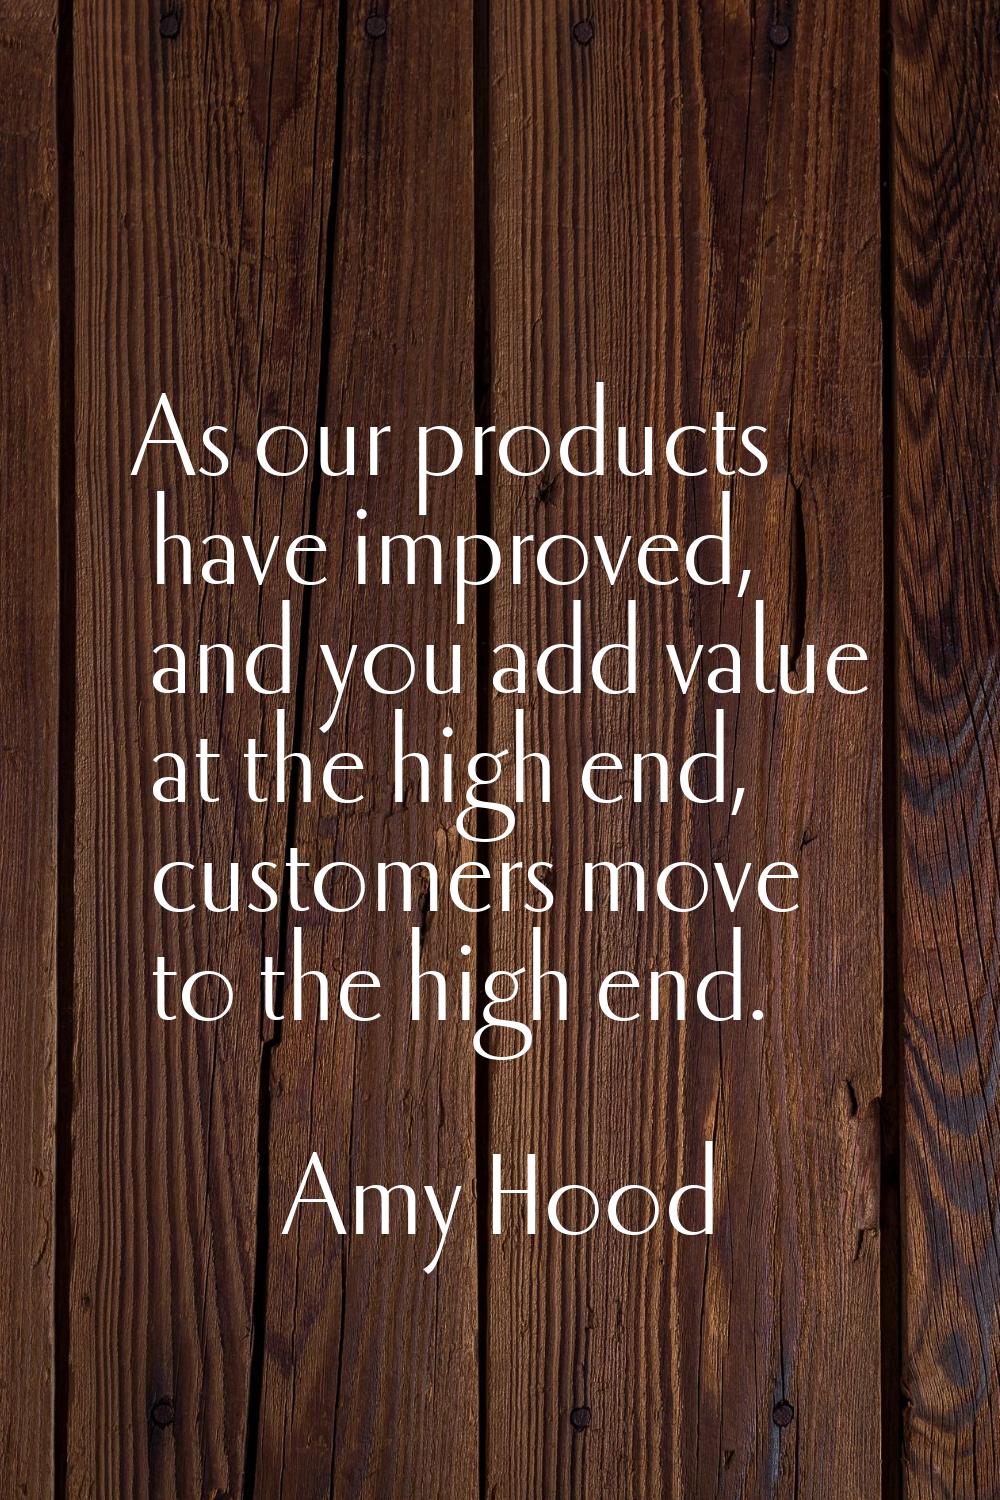 As our products have improved, and you add value at the high end, customers move to the high end.